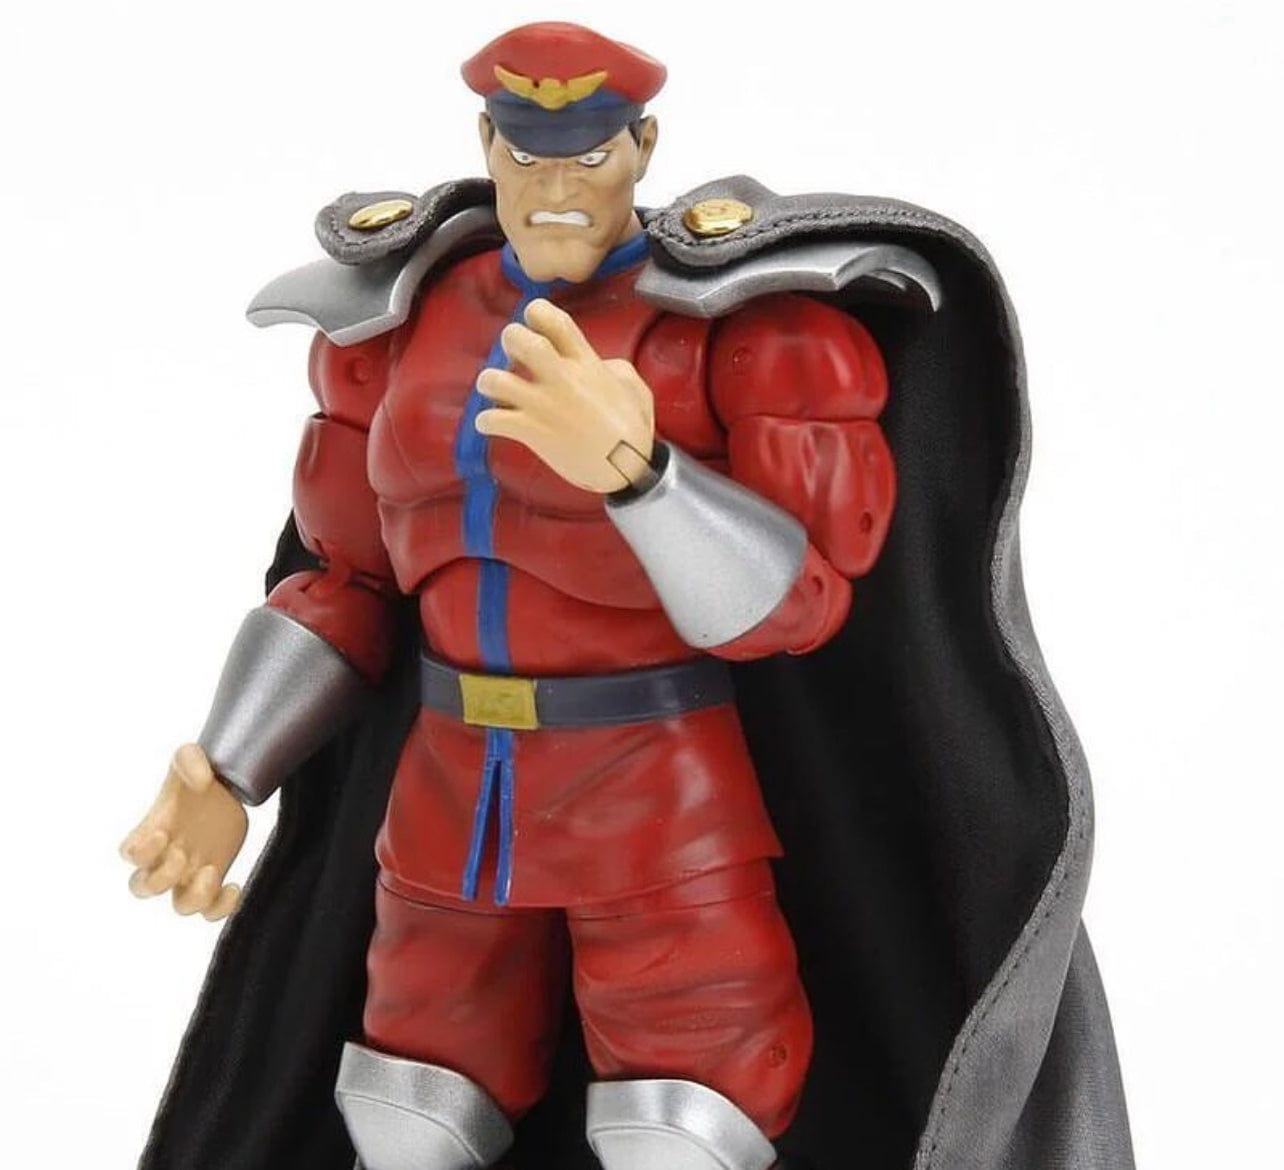 Ultra Street Fighter II: The Final Challengers Action Figure 1/12 Bison Media 1 of 1